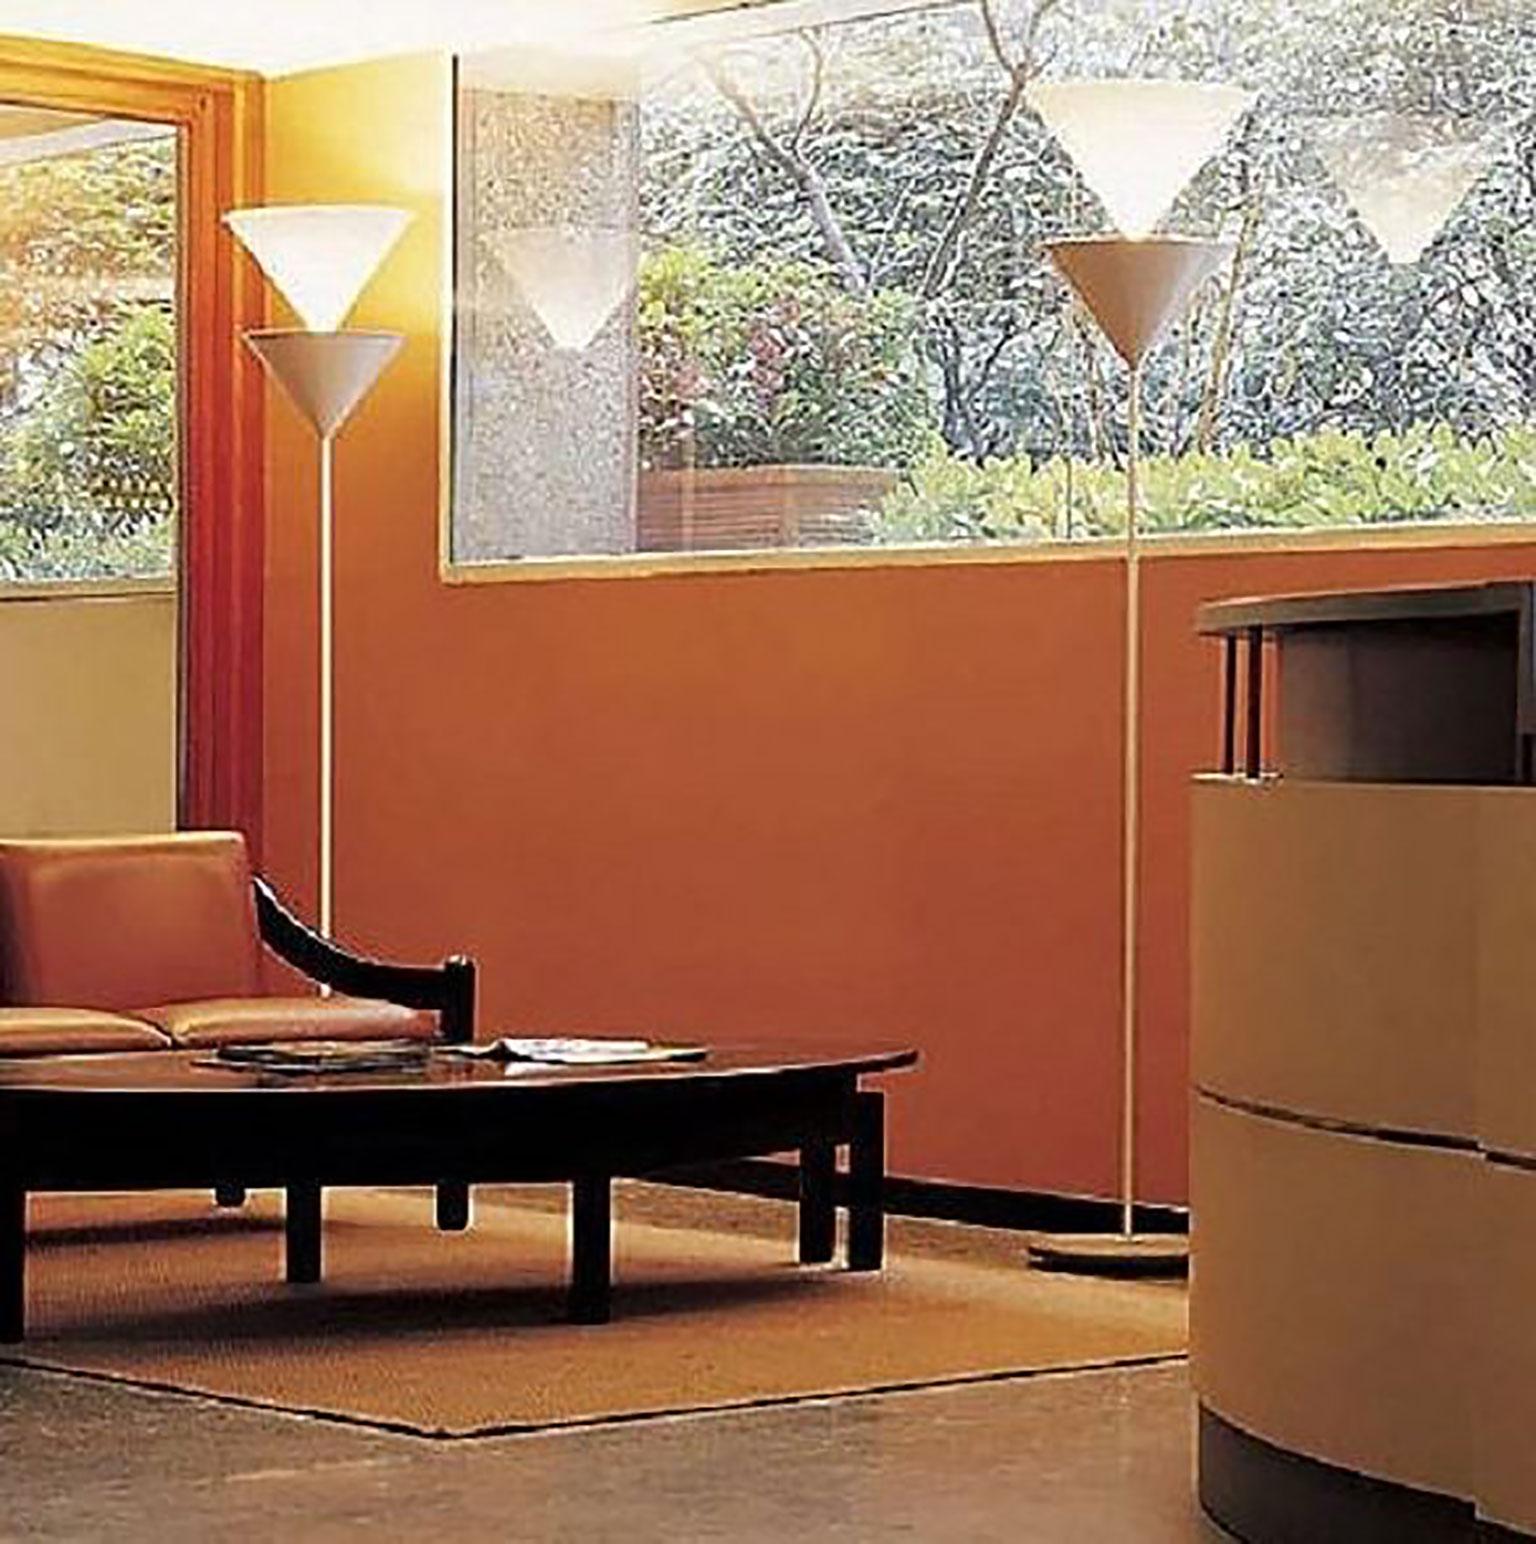 Pascal floor lamp by Vico Magistretti for Oluce. Vico Magistretti was an icon of mid-20th century design. During his career, he won the prestigious Compasso d'Oro numerous times. The Pascal Floor lamp is a classic fixture that supplements a wide